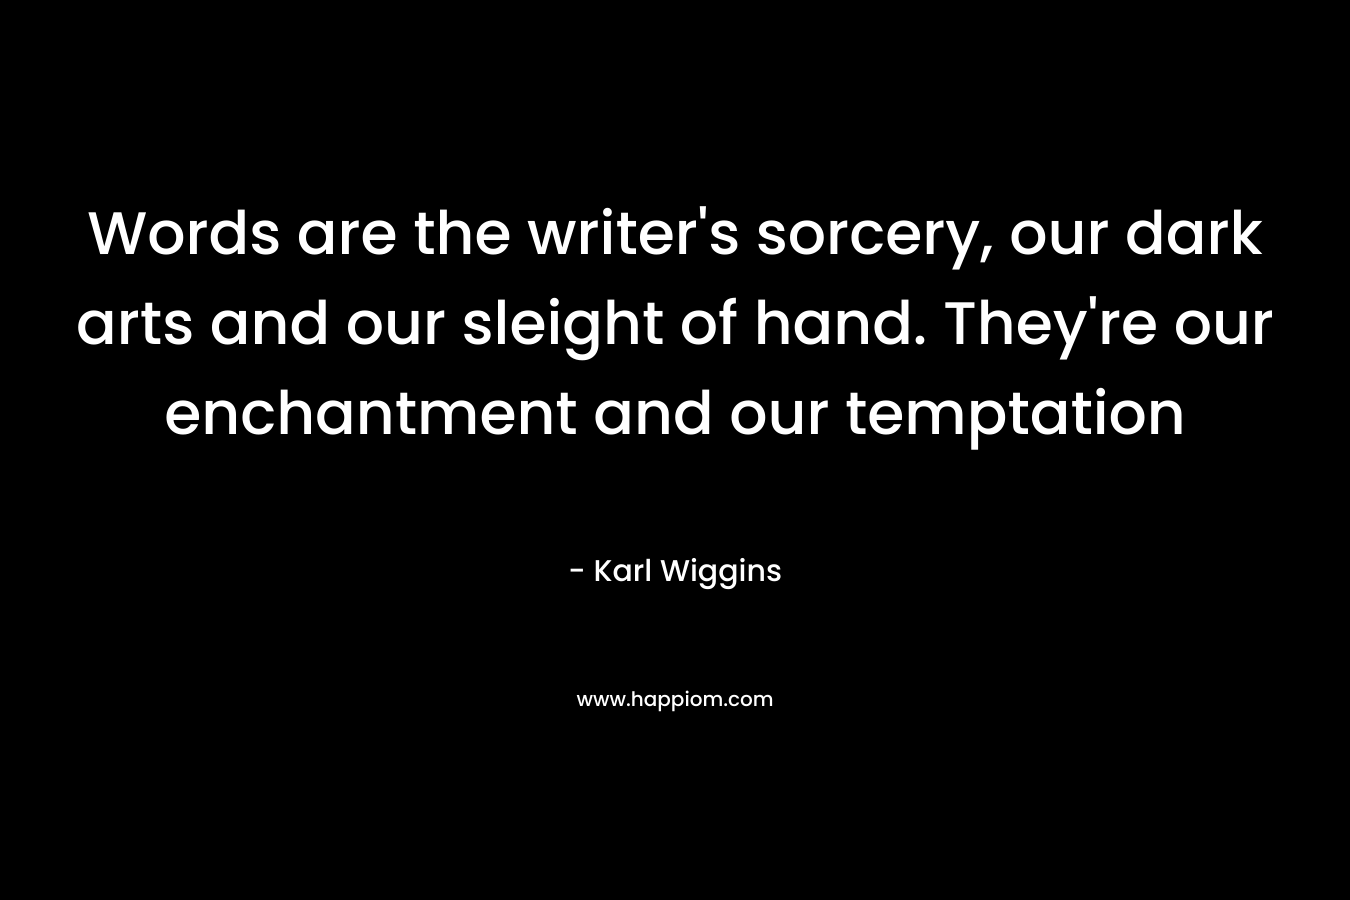 Words are the writer's sorcery, our dark arts and our sleight of hand. They're our enchantment and our temptation